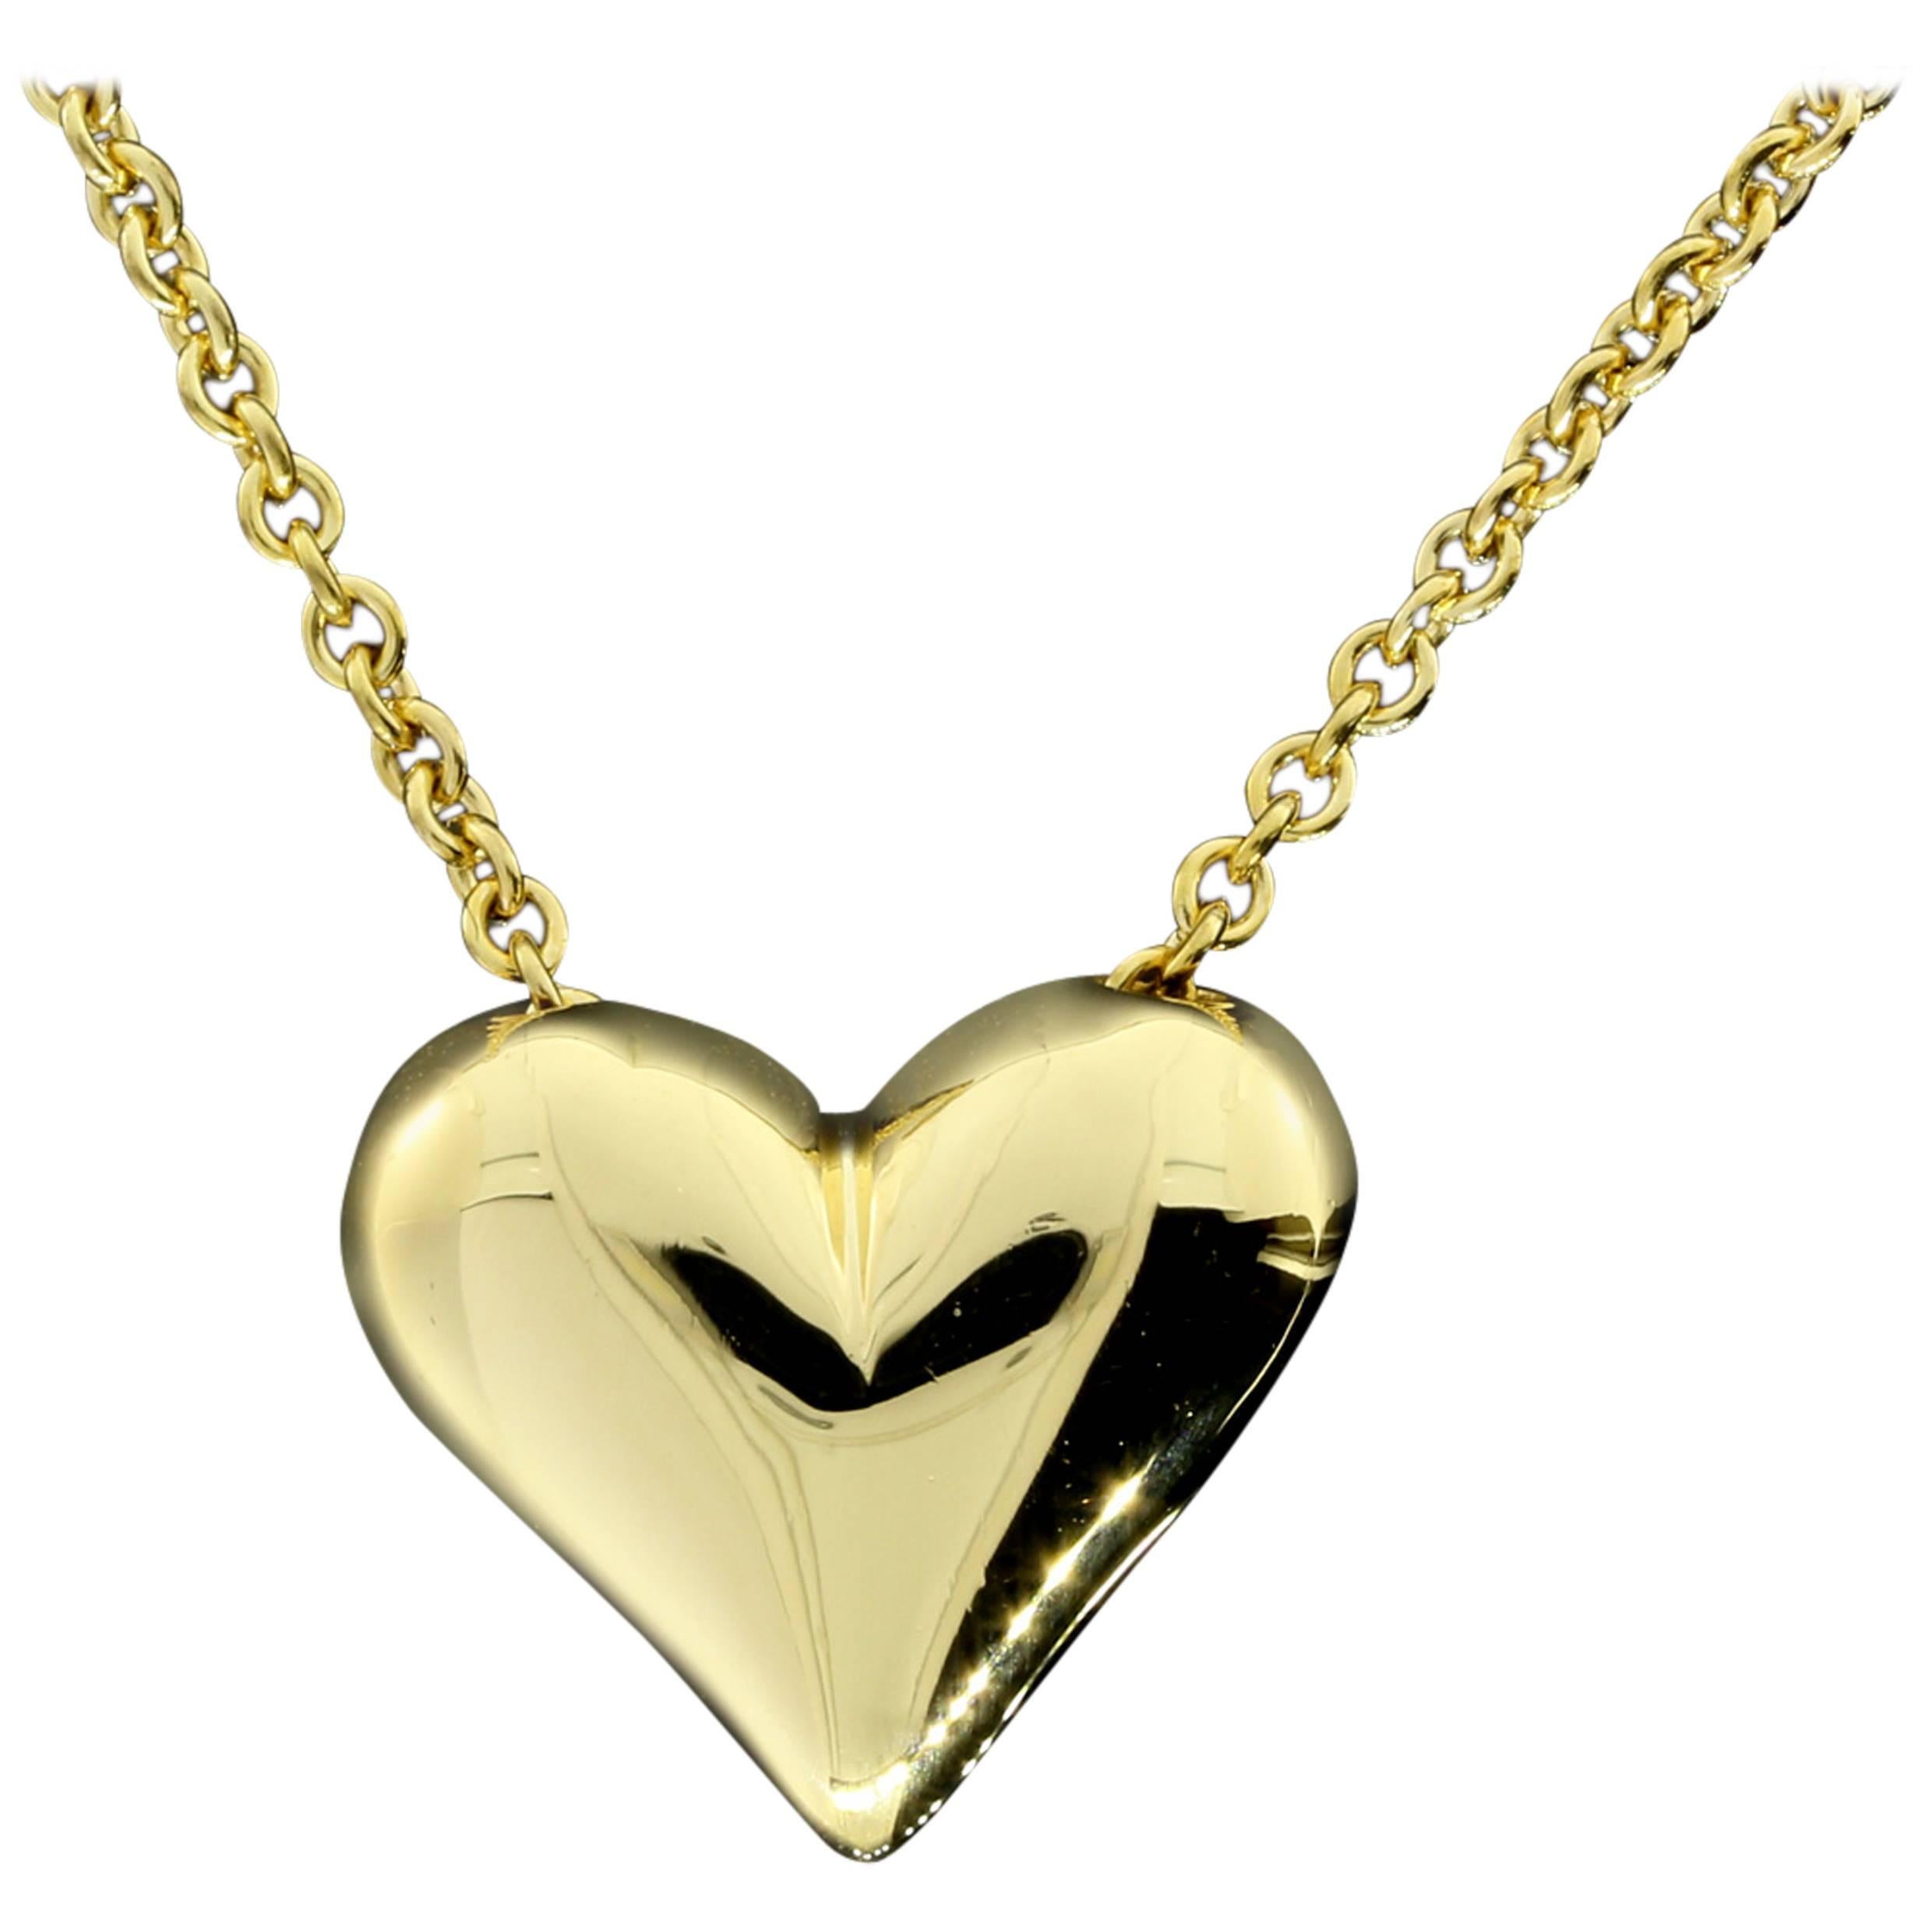 Tiffany & Co. Gold Puffed Heart Pendant Necklace